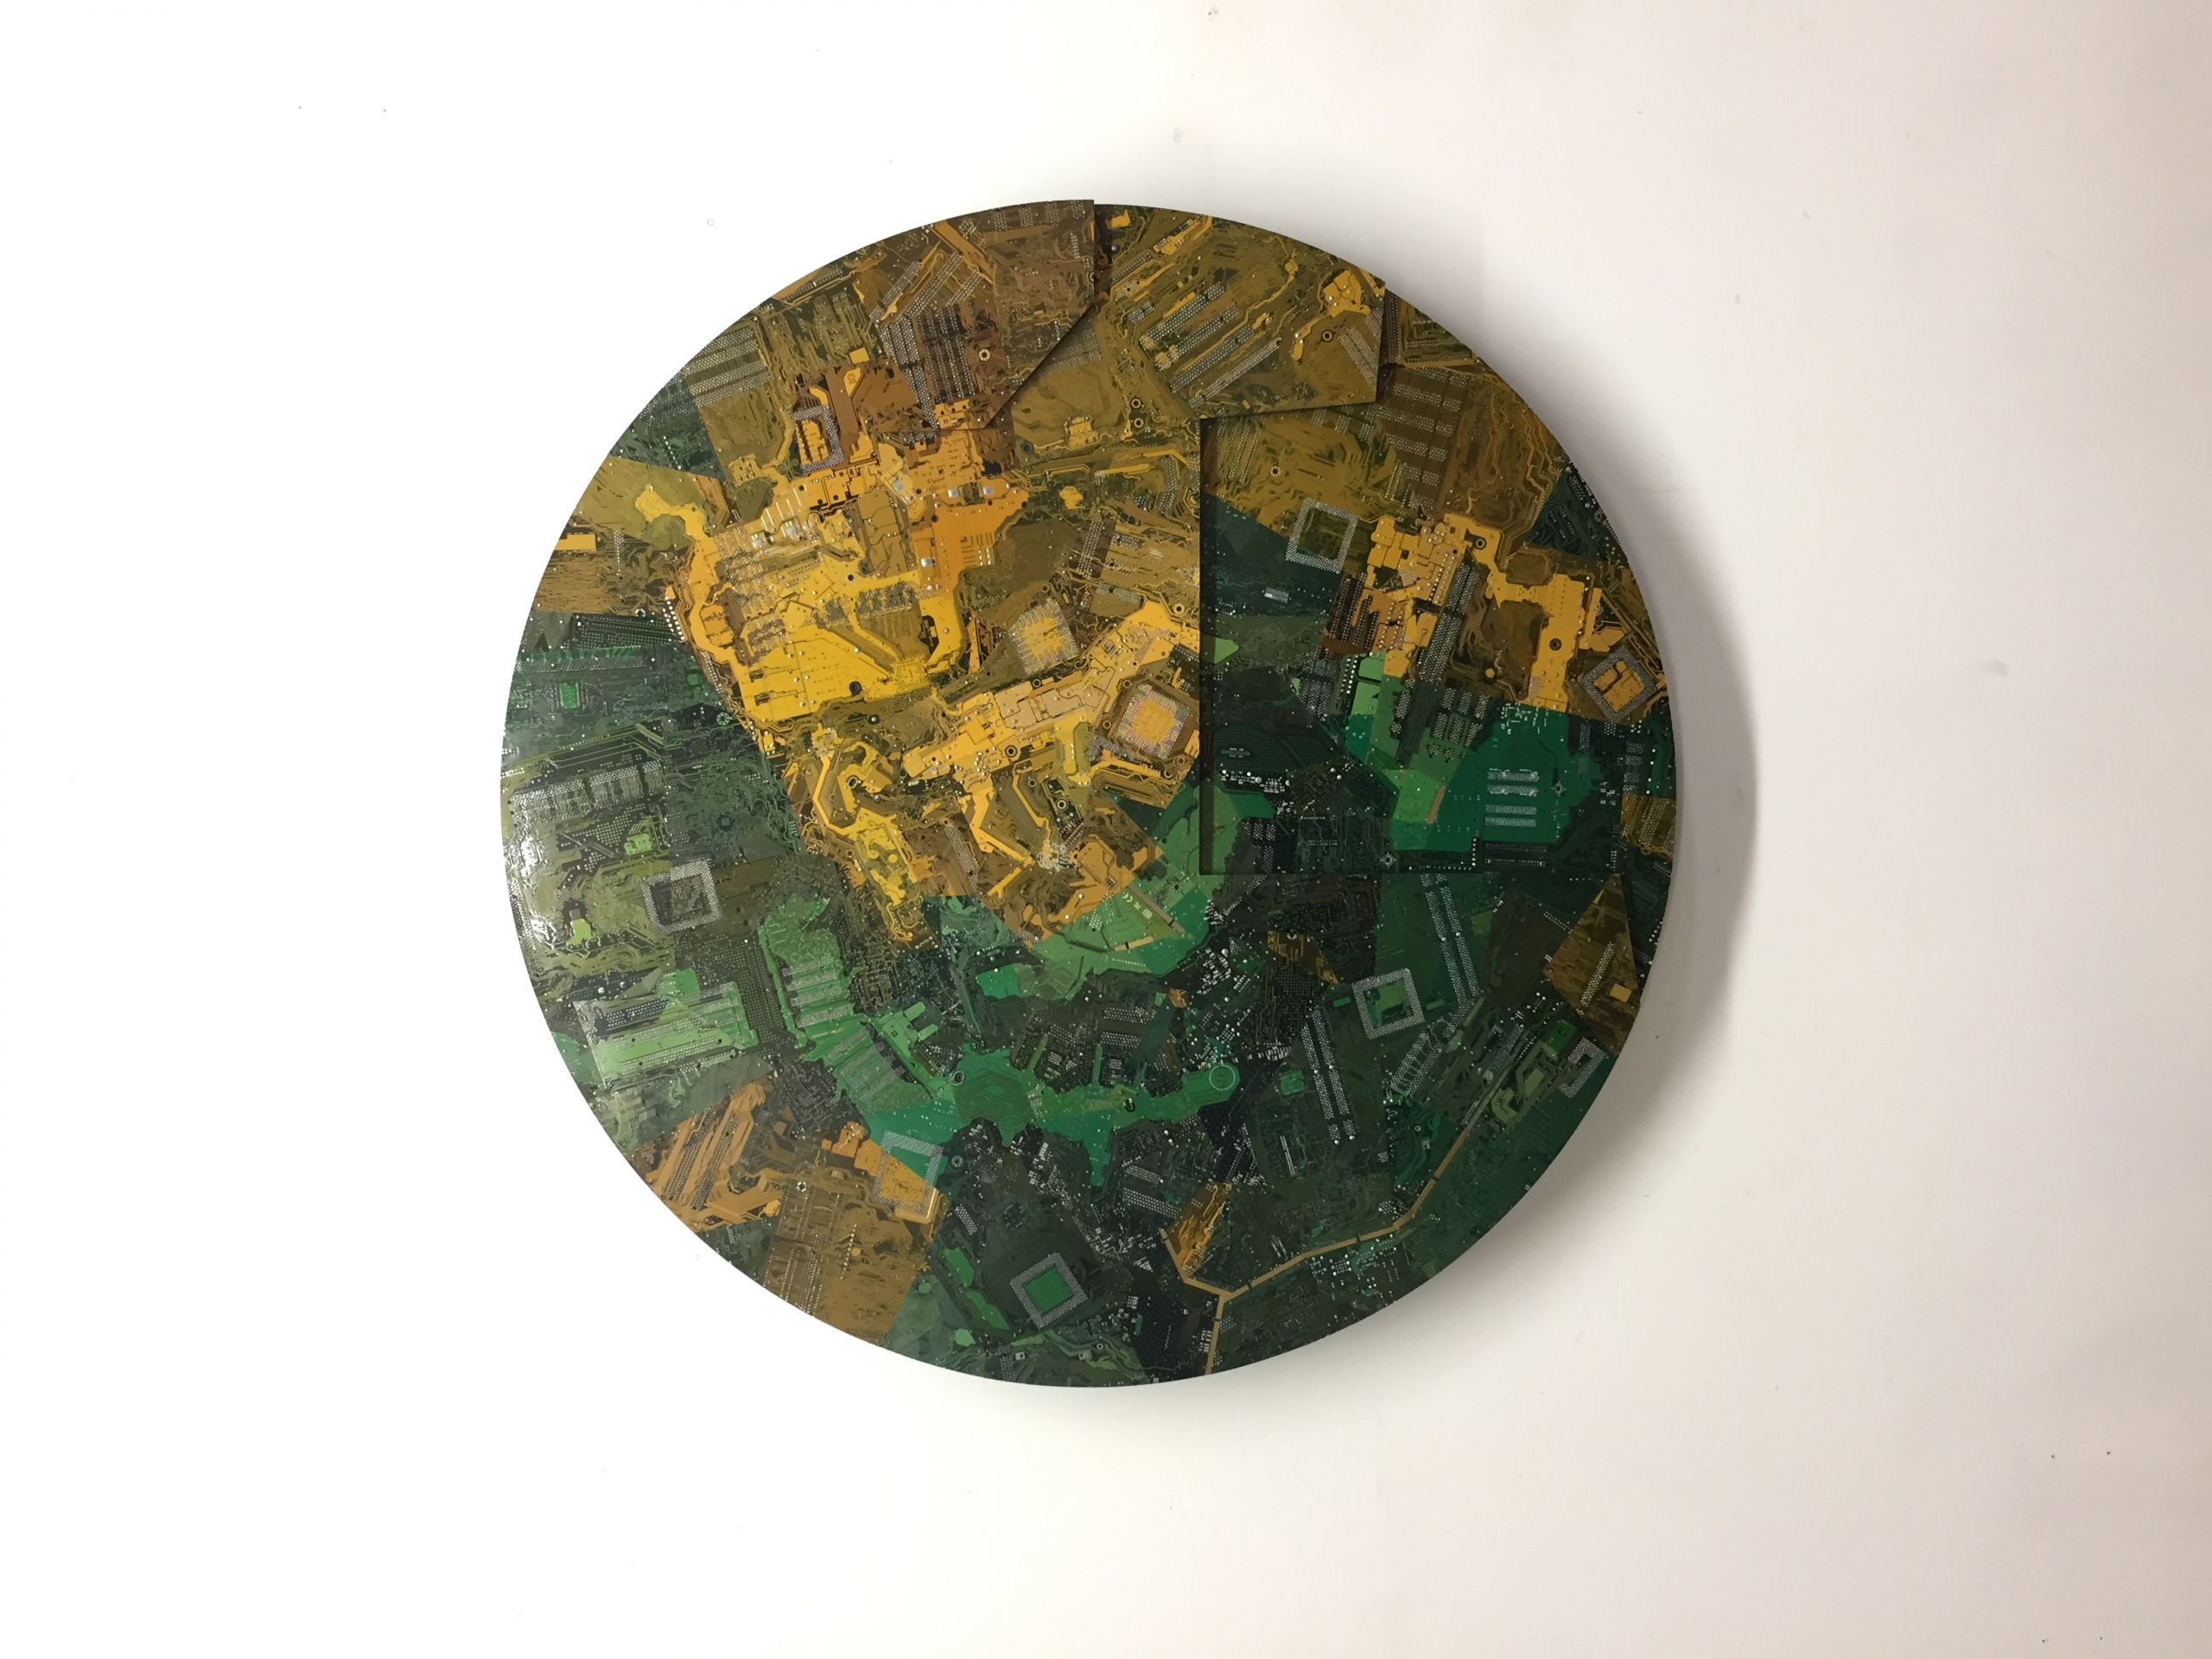     Wally Dion, Butterfly, 37 ¼ inches diameter, recycled circuitboards, plywood, nails, 2018 .

